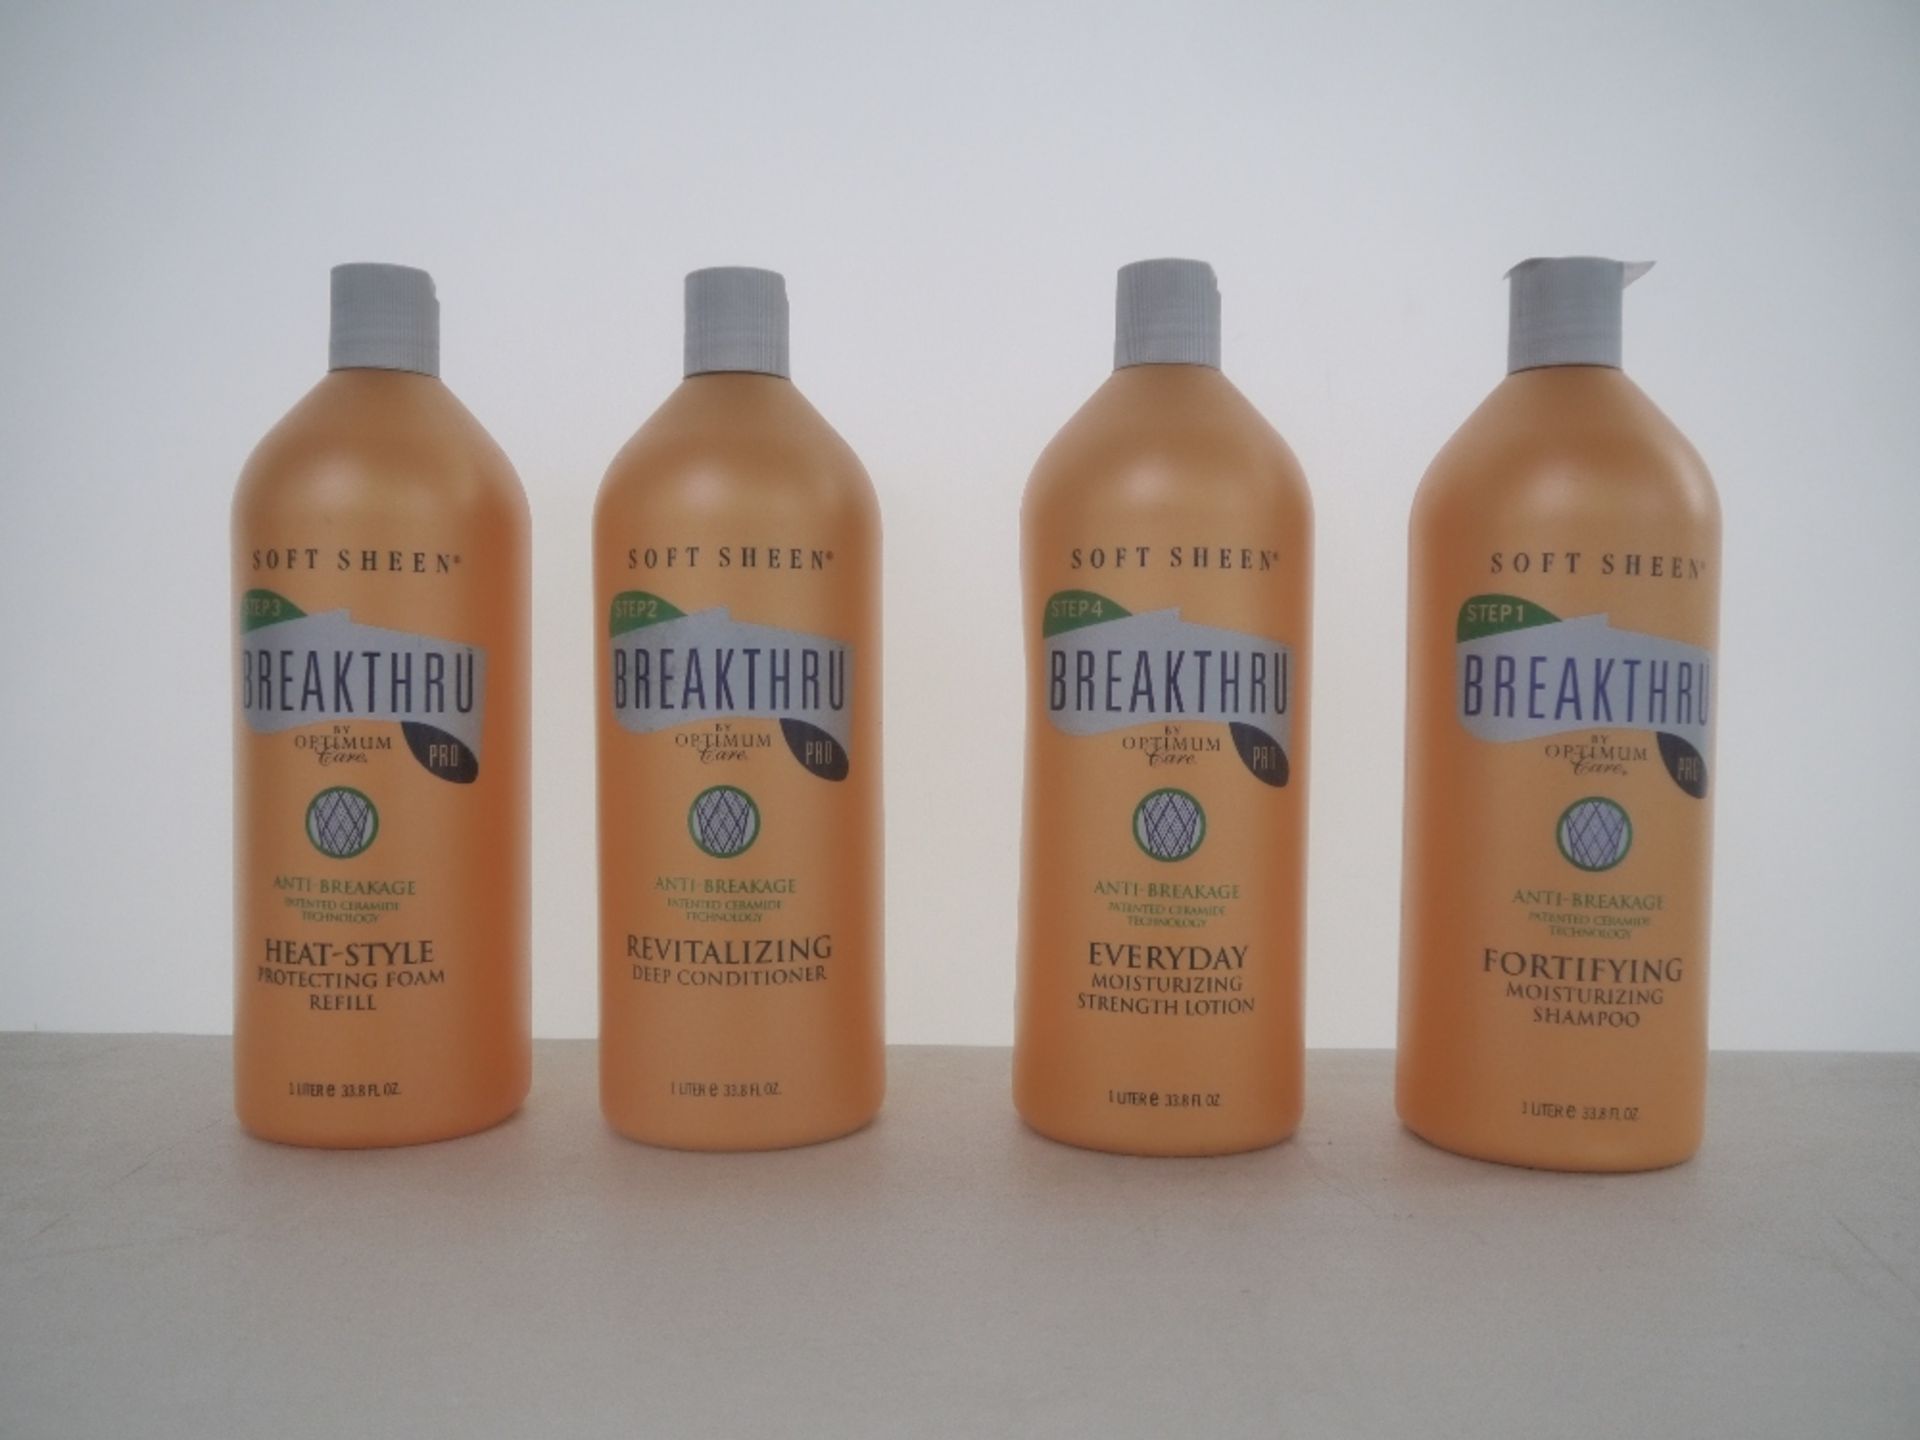 4 Soft sheen Optium Breakthru Care Hair Products, being the following; 1 Litre of Everyday